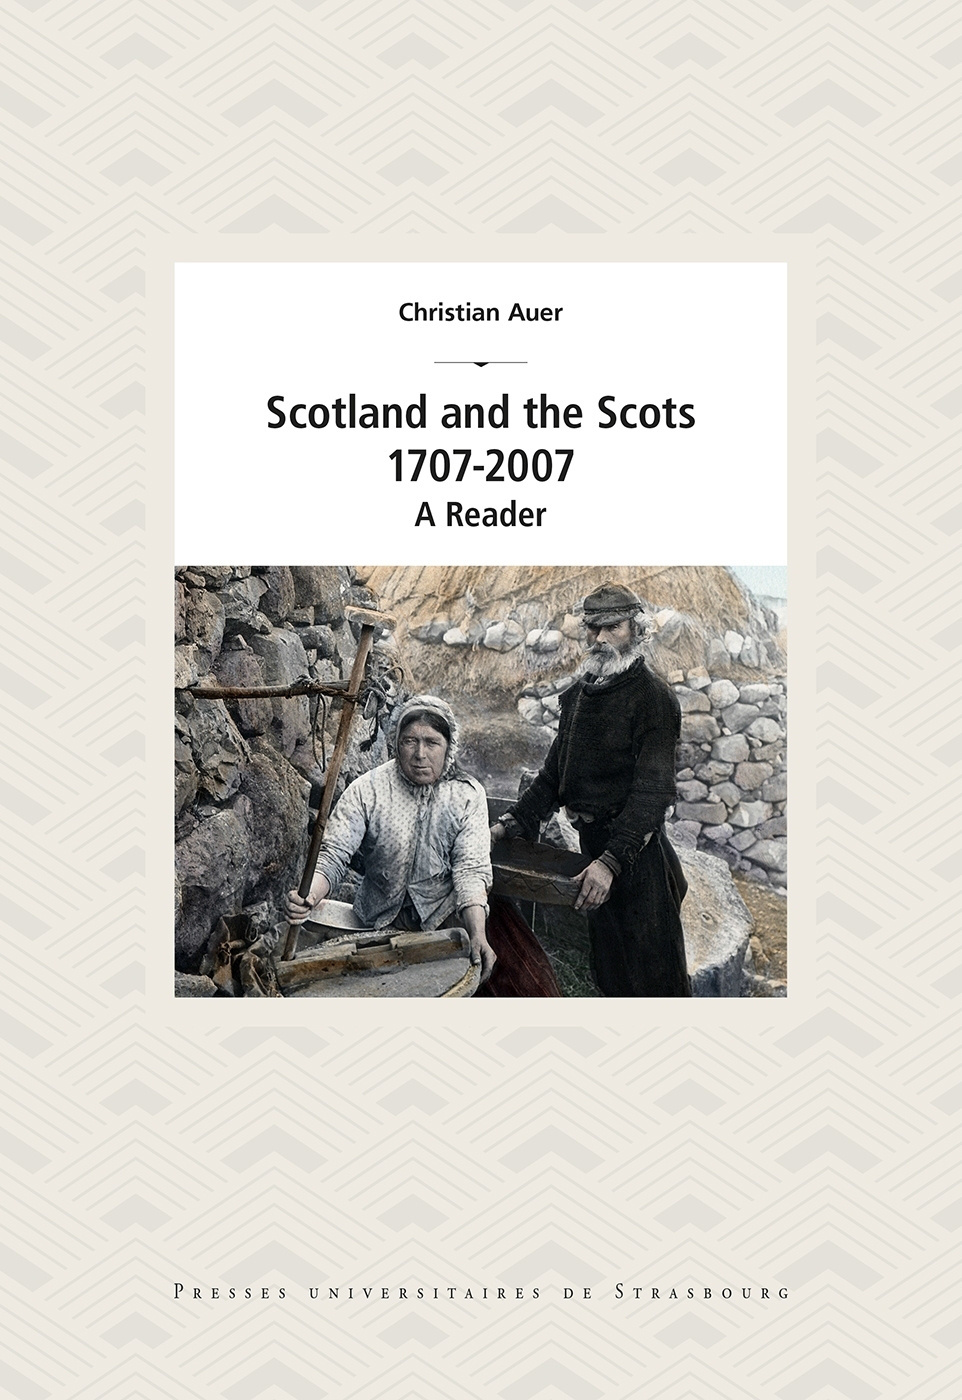 Scotland and the Scots